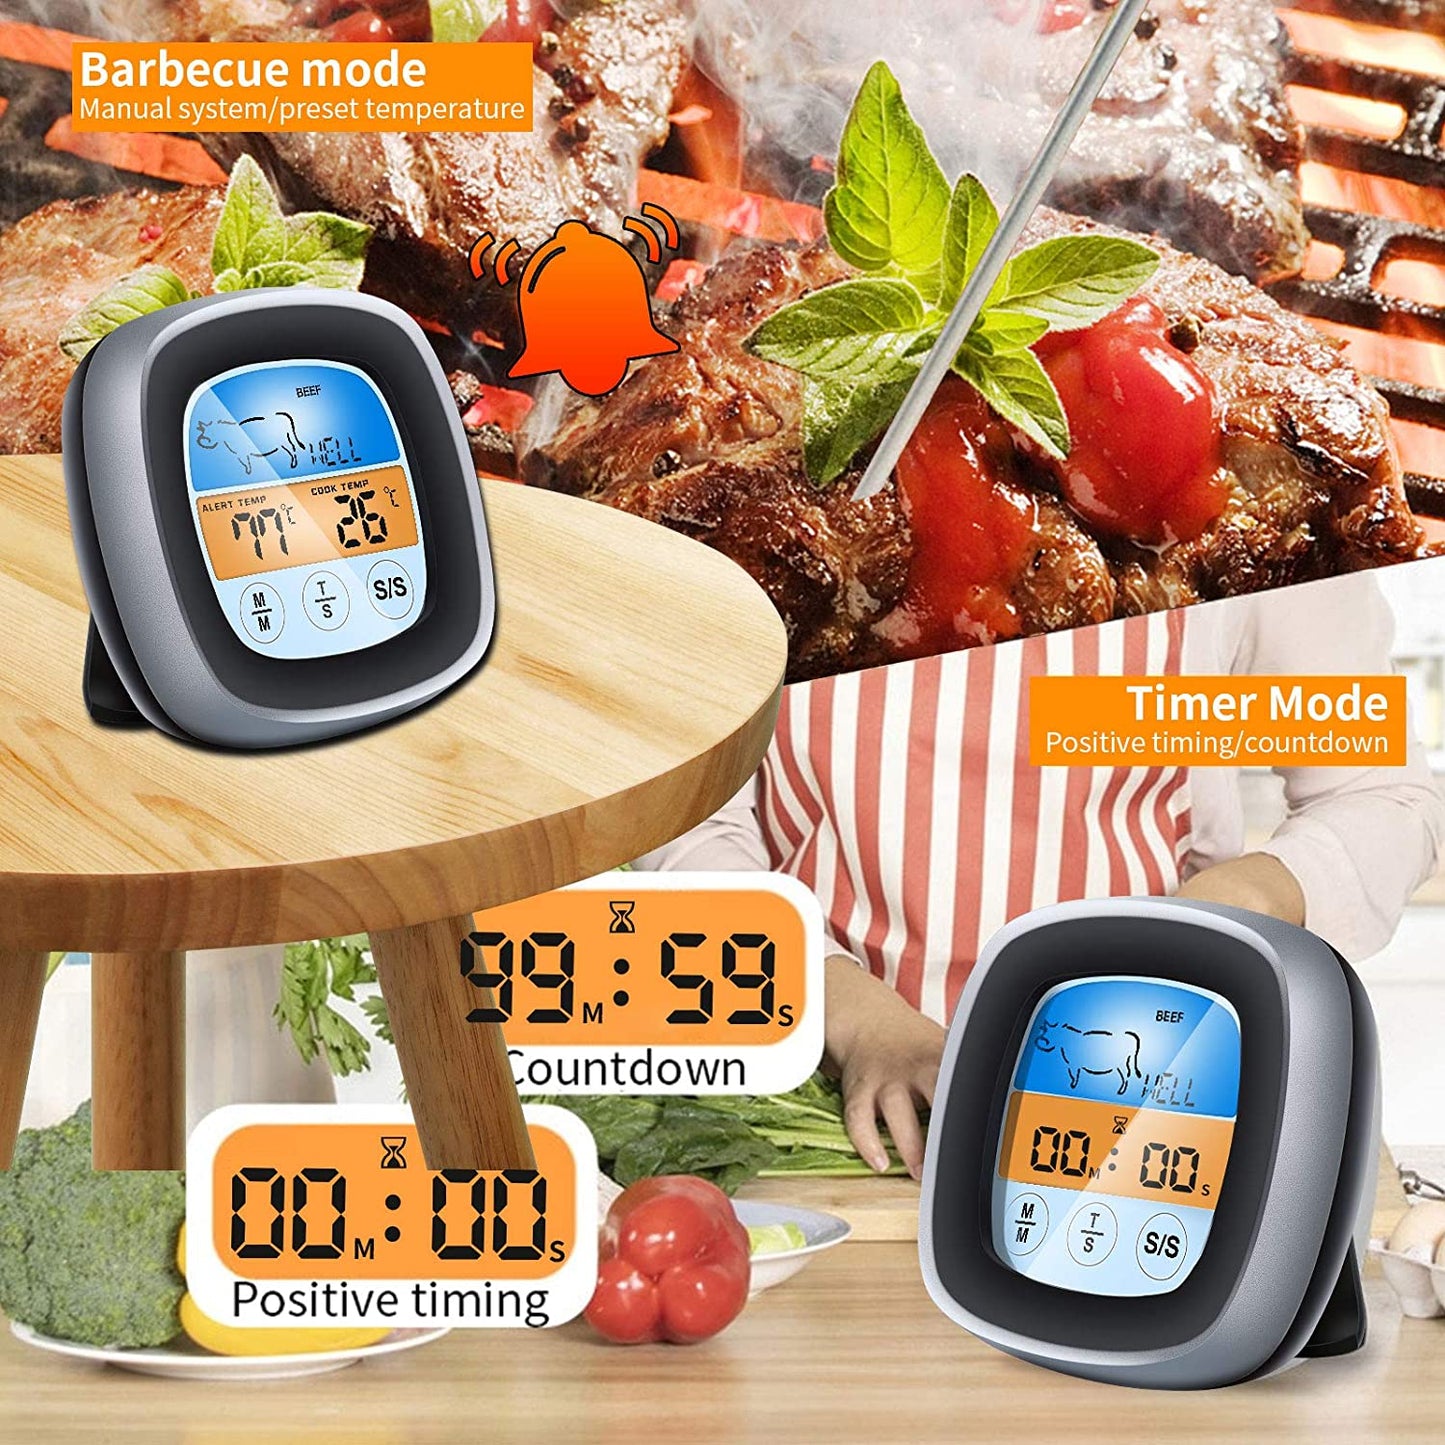 Meat Thermometer, Instant Read Food Thermometer for Cooking, Digital Oven Safe Meat Thermometer for Grilling and Smoking, with Sensitive Color LCD Display